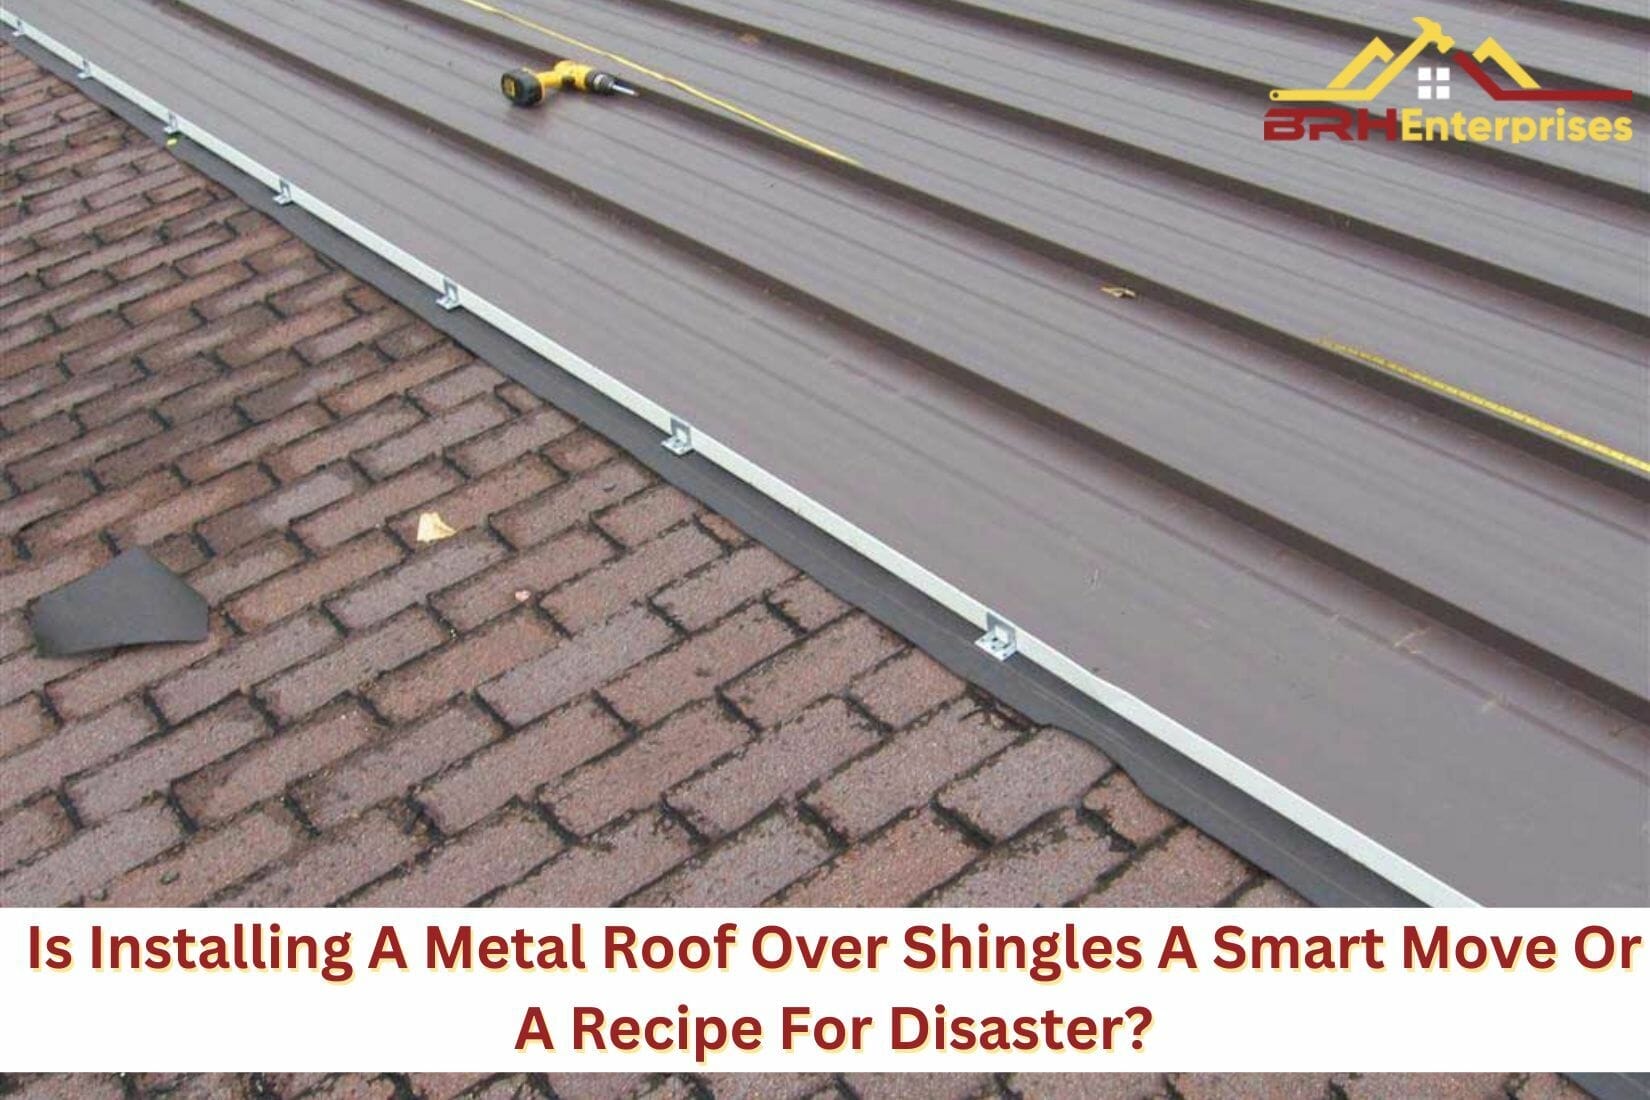 Is Installing A Metal Roof Over Shingles A Smart Move Or A Recipe For Disaster?